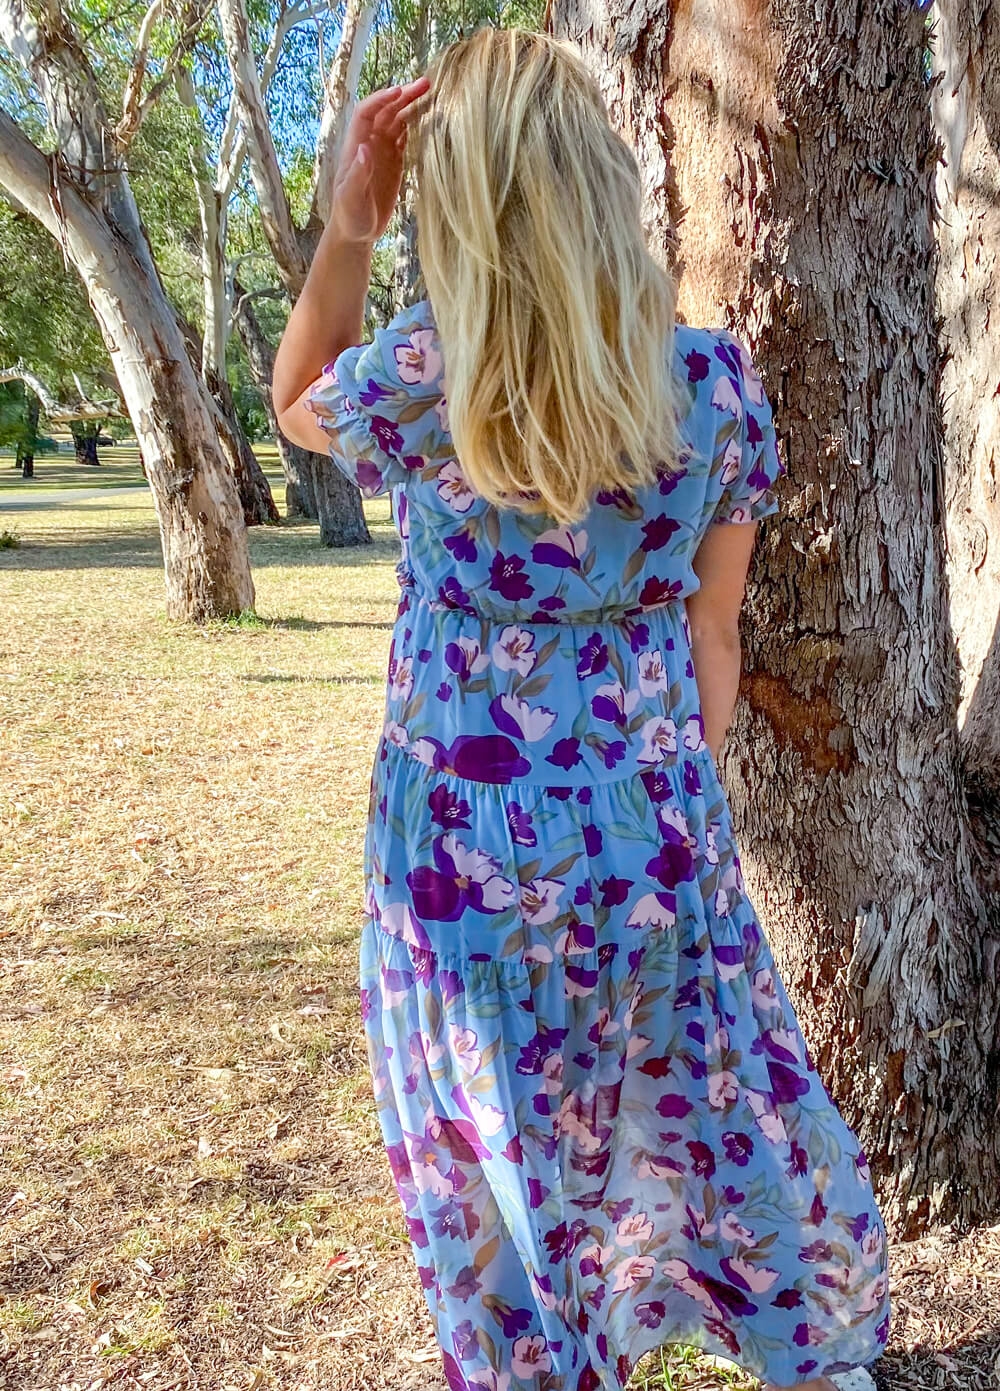 Lait & Co - Wanderlust Short Sleeve Maternity Maxi Gown in Blue/Purple Floral